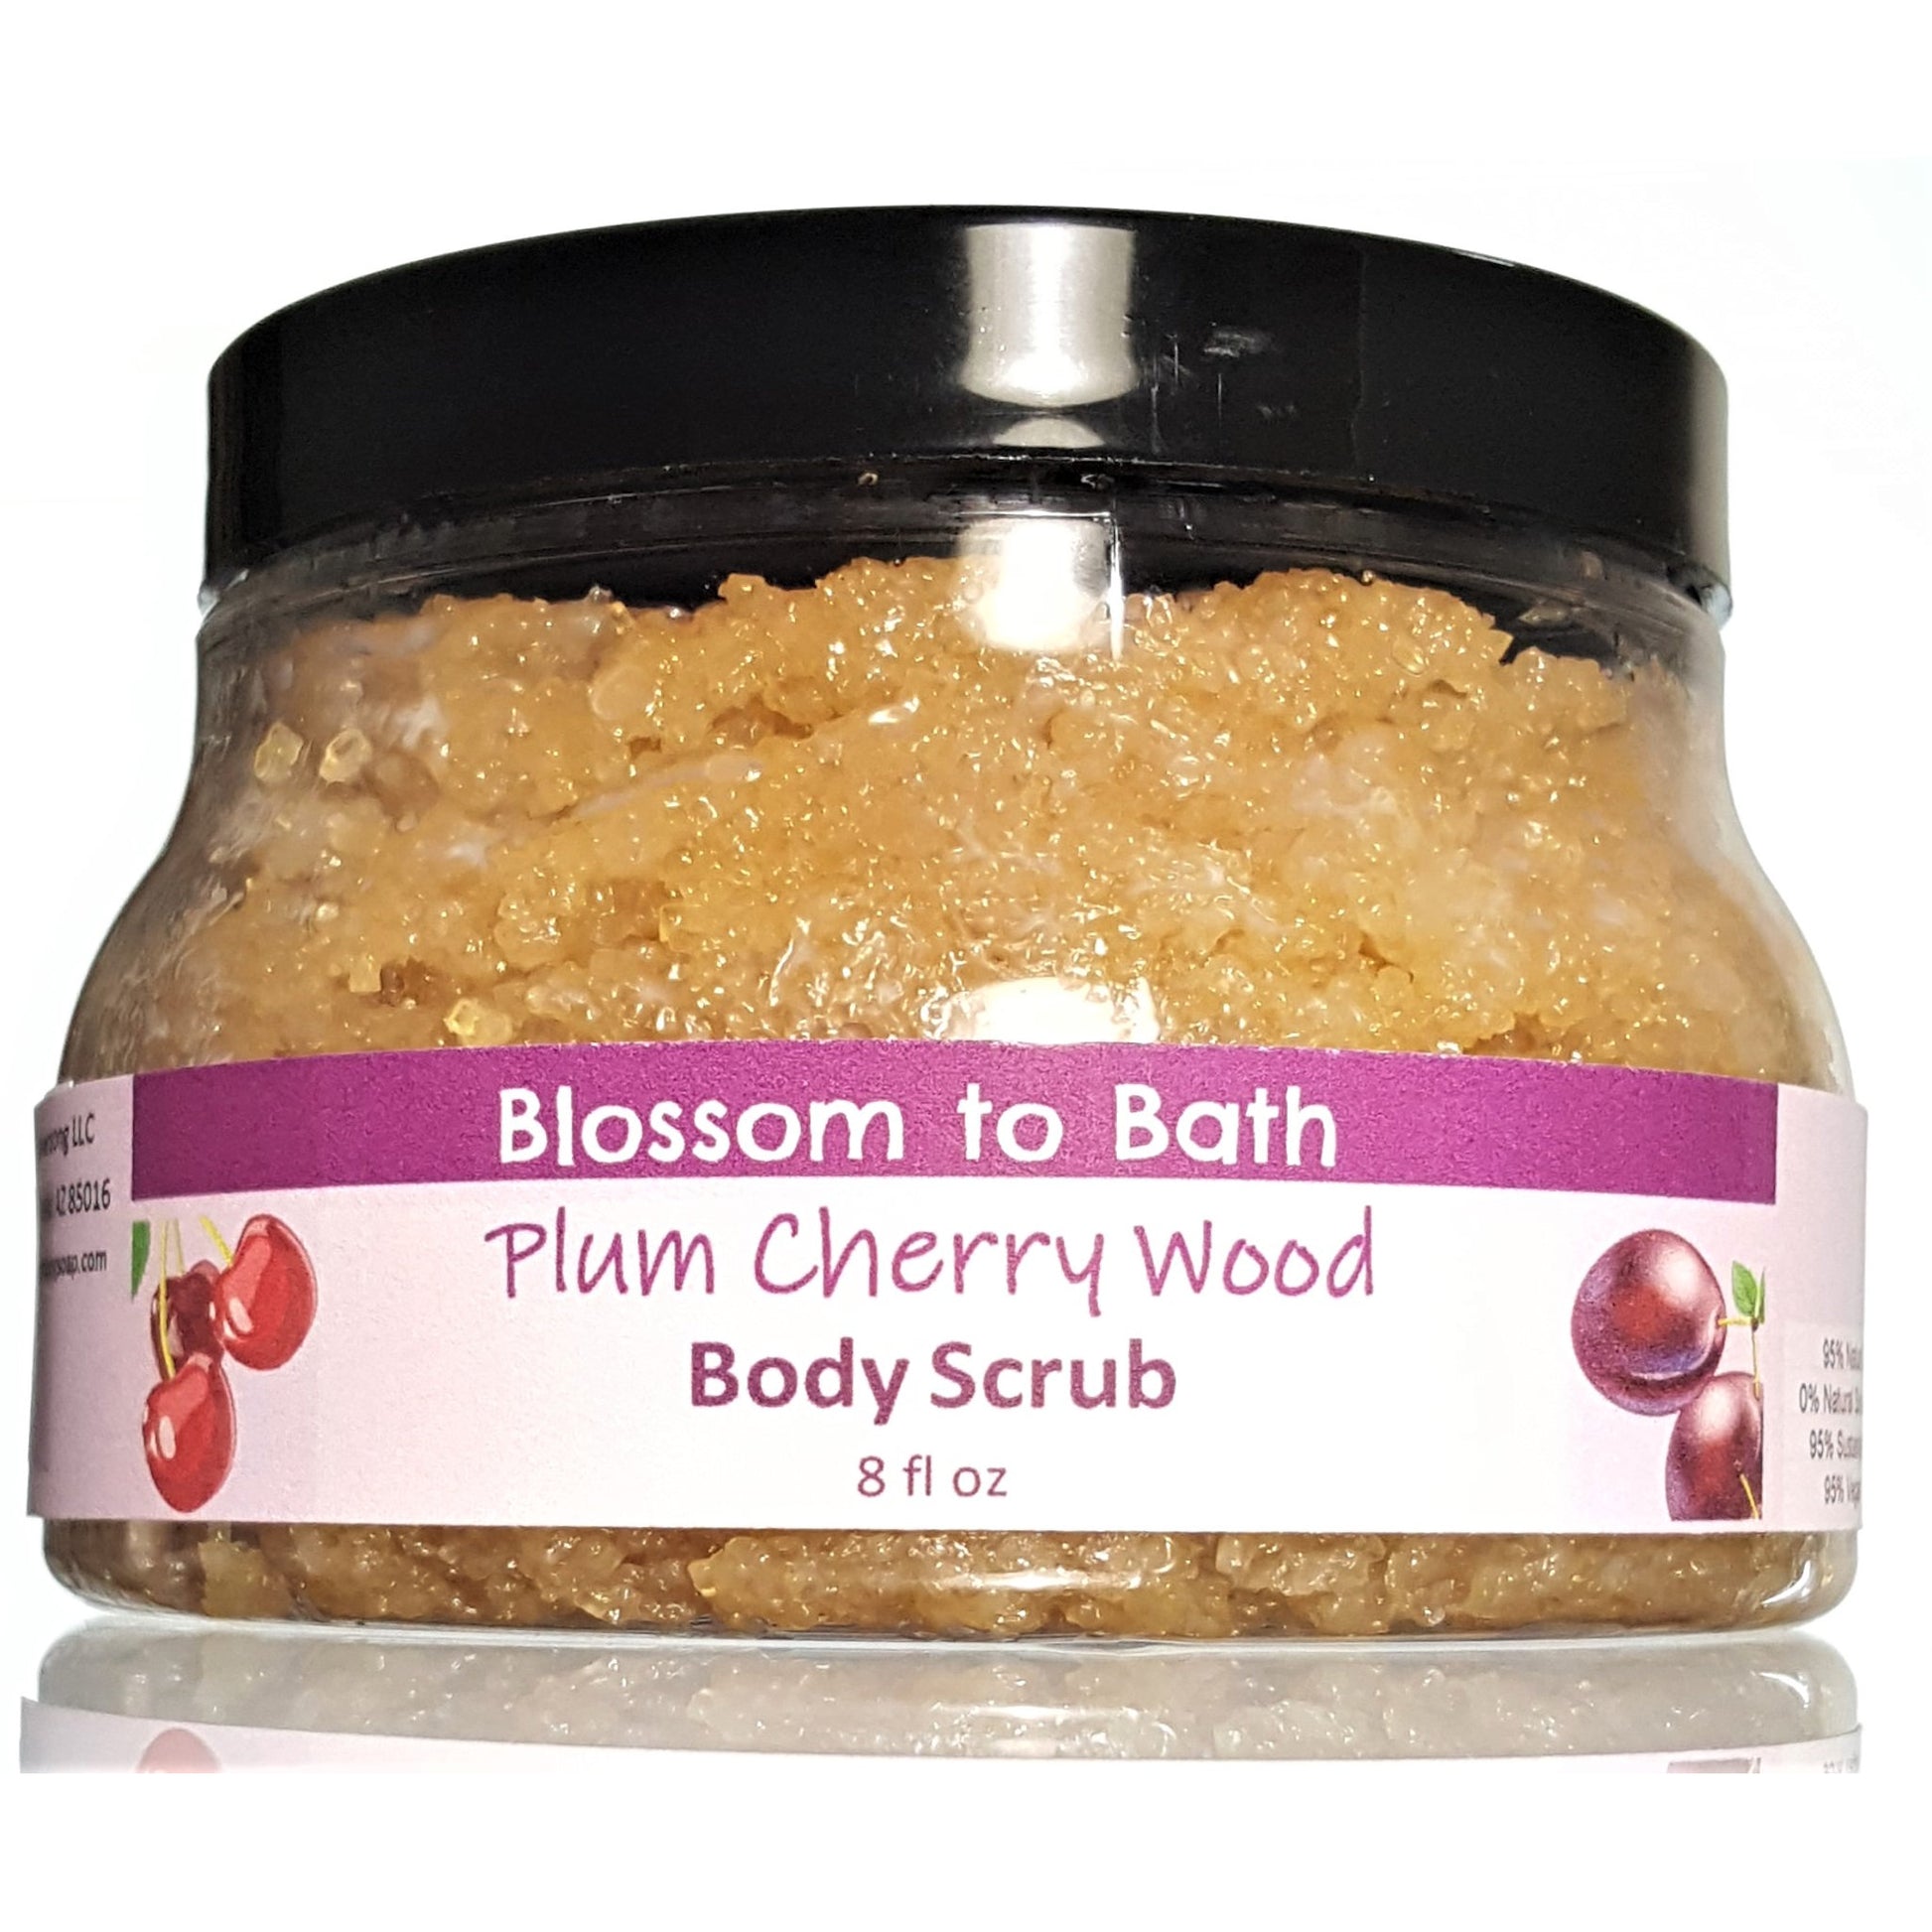 Buy Blossom to Bath Plum Cherry Wood Body Scrub from Flowersong Soap Studio.  Large crystal turbinado sugar plus  rich oils conveniently exfoliate and moisturize in one step  A charmingly sweet and woodsy fragrance.